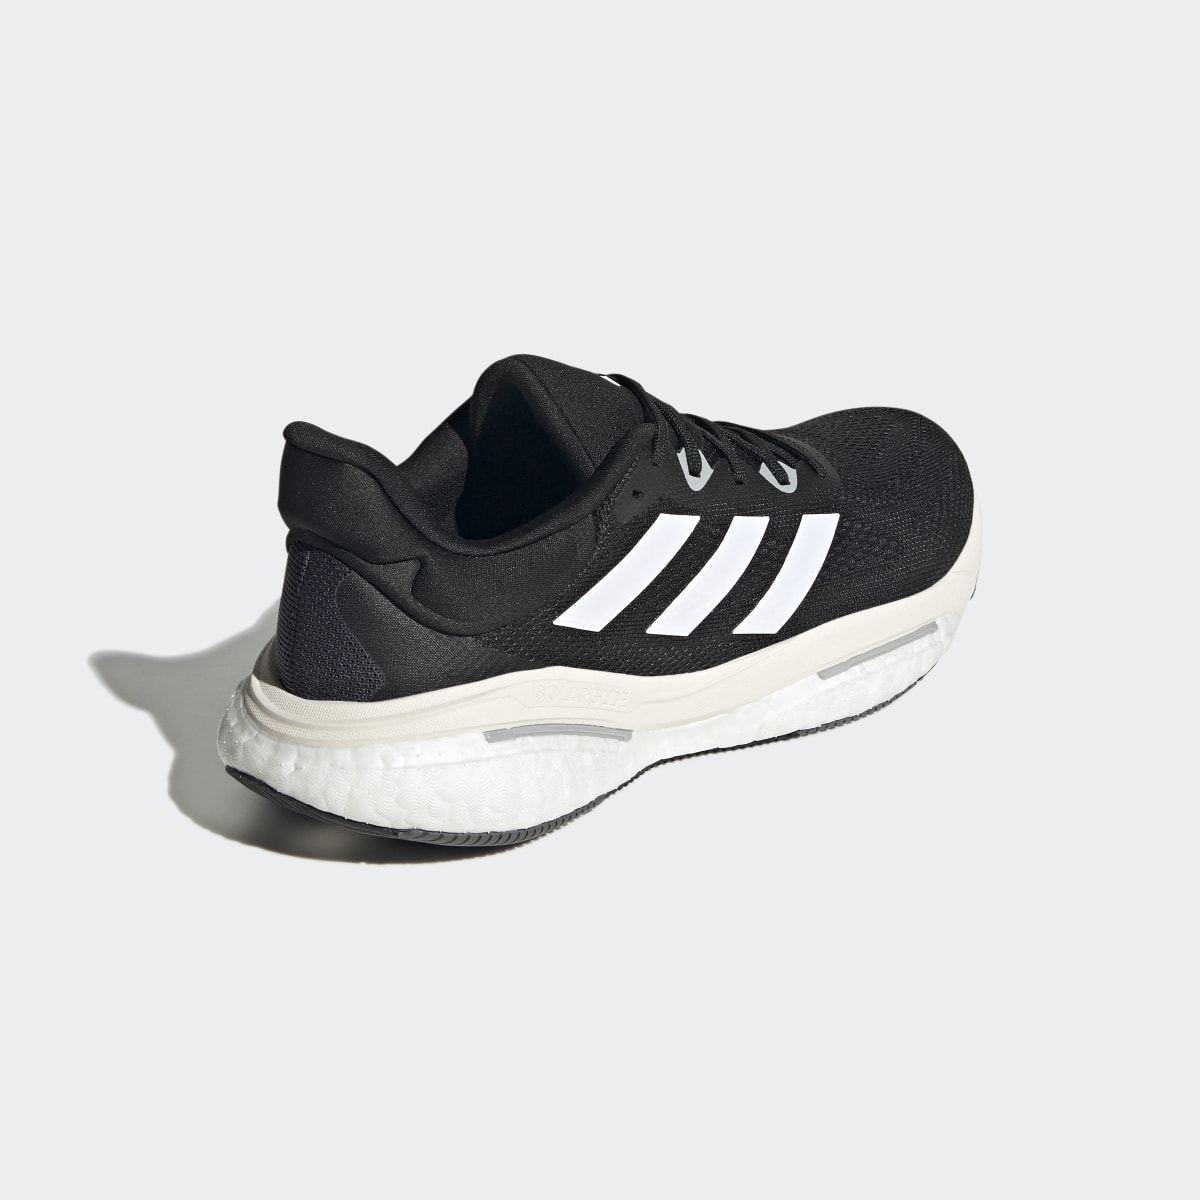 Adidas Solarglide 6 Running Shoes. 6